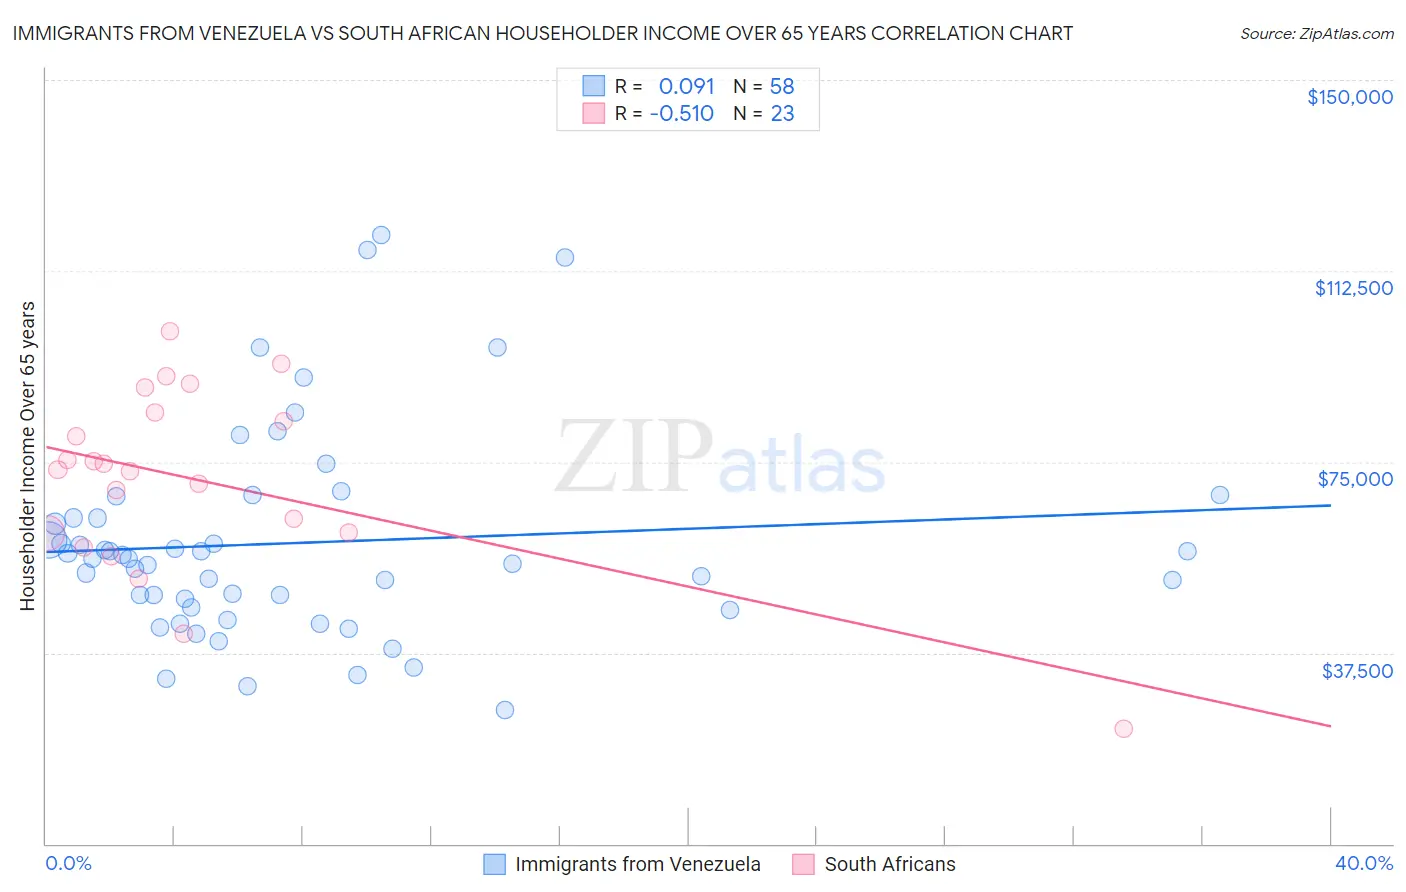 Immigrants from Venezuela vs South African Householder Income Over 65 years